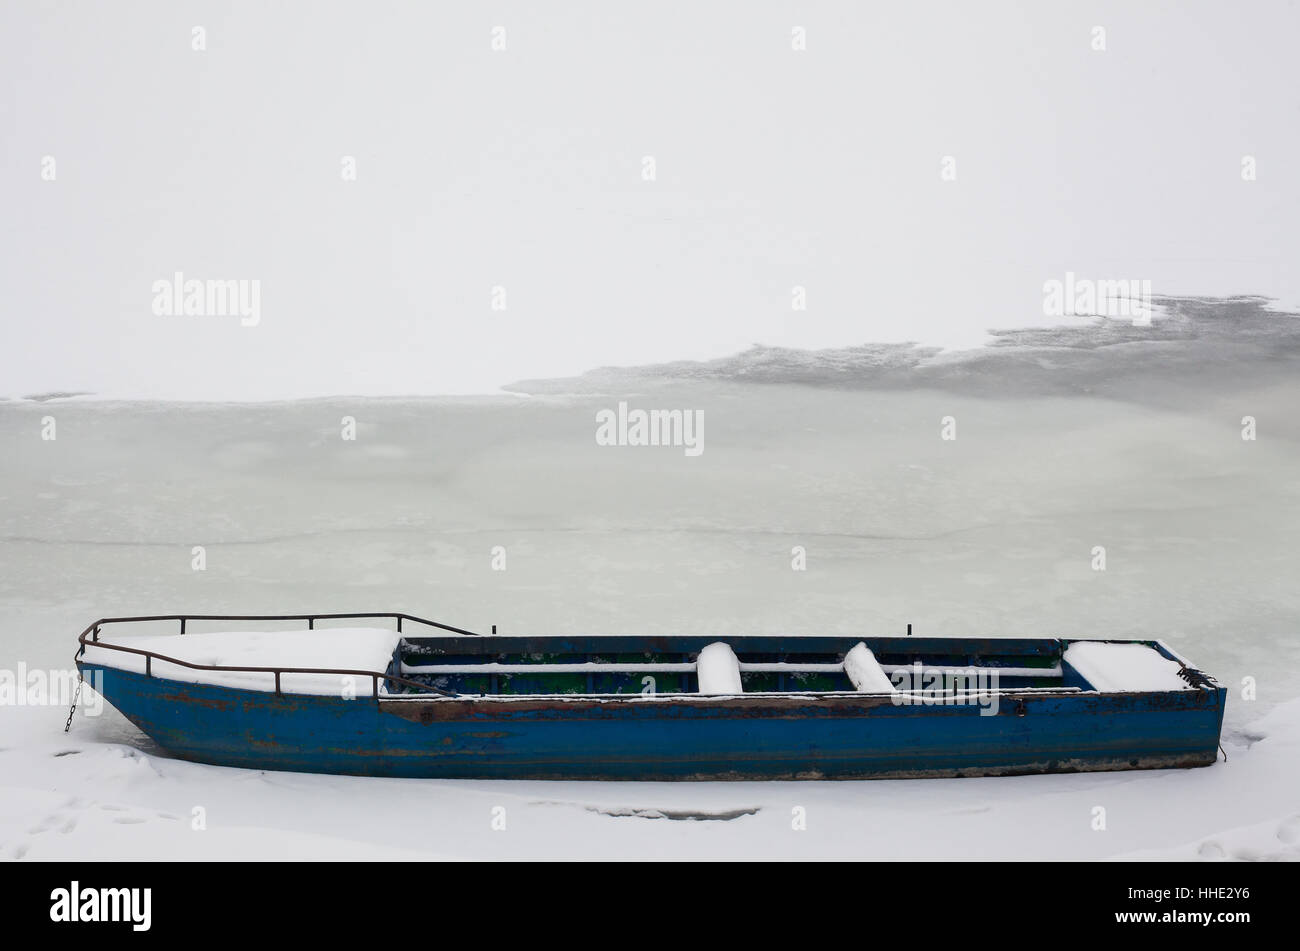 Abstract composition of an old wooden boat and frozen river. Stock Photo